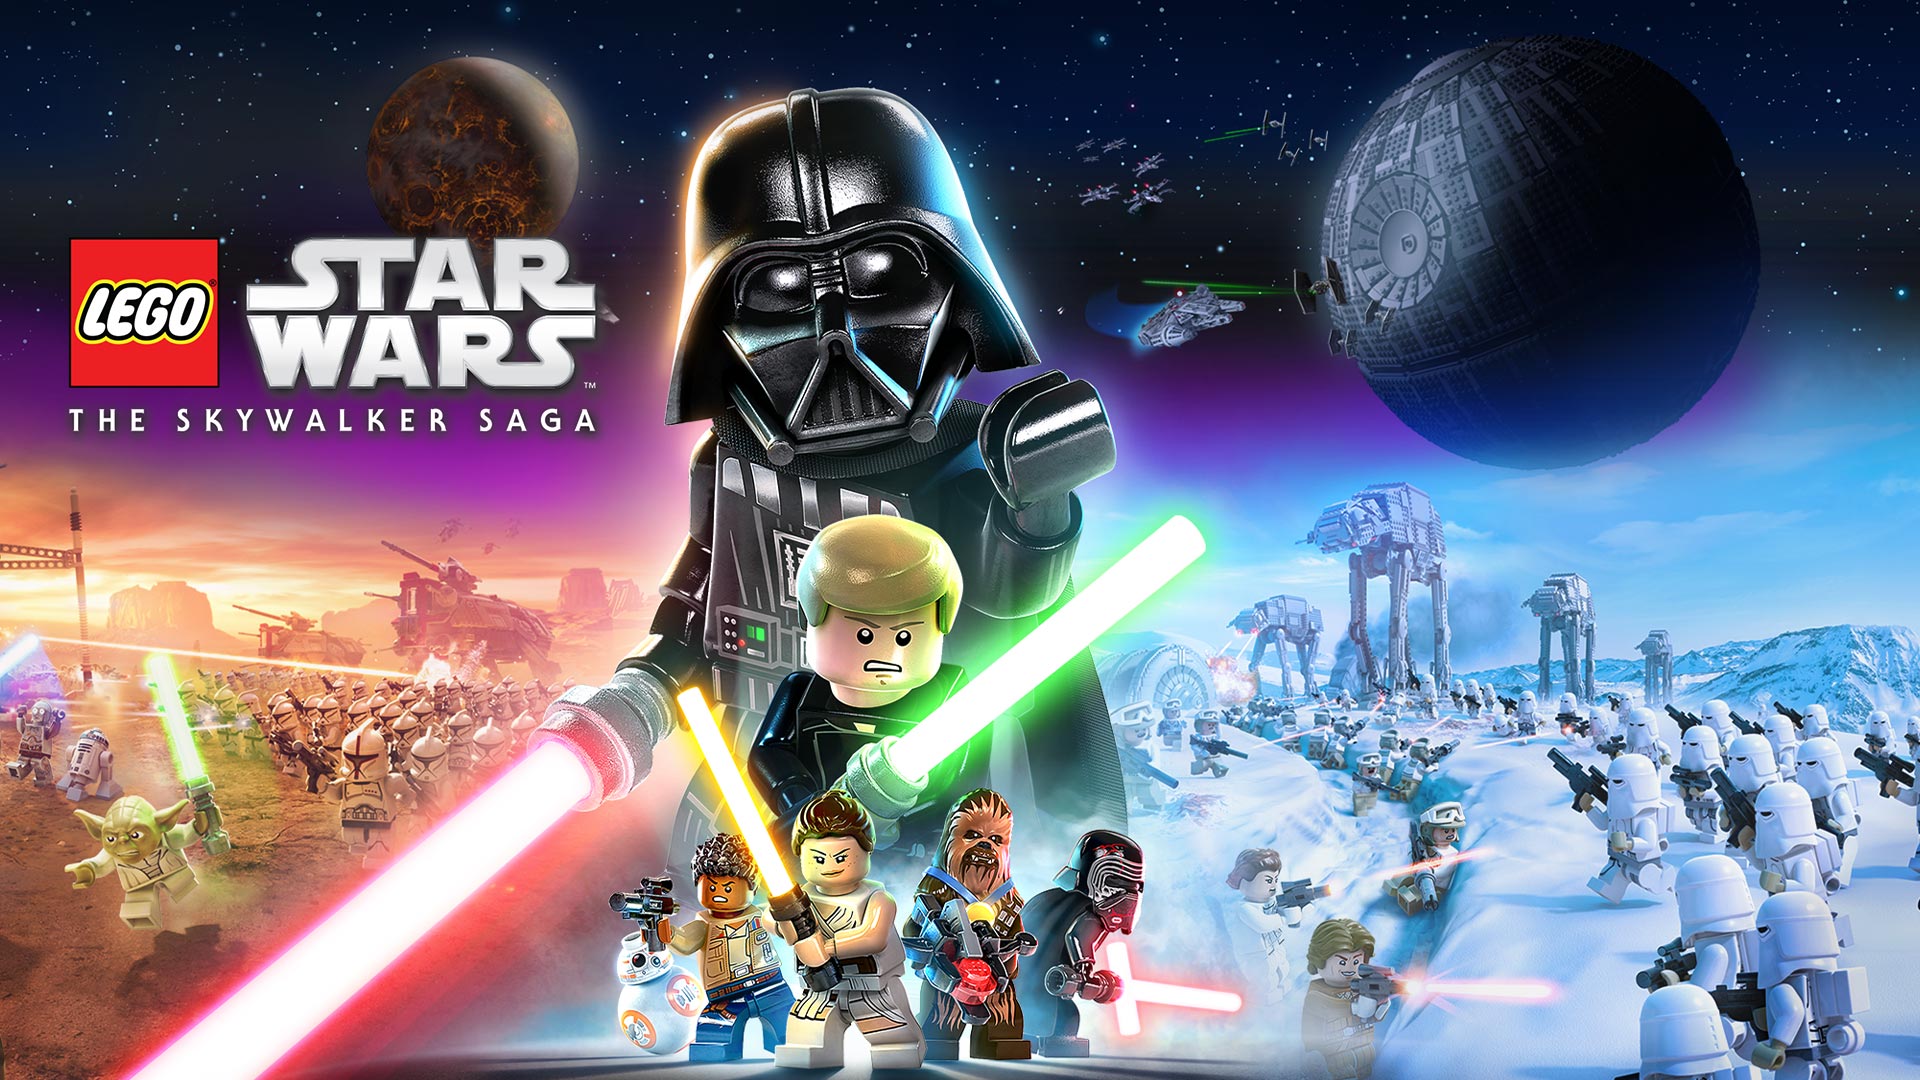 LEGO Star Wars: The Skywalker Saga Complete is out now!